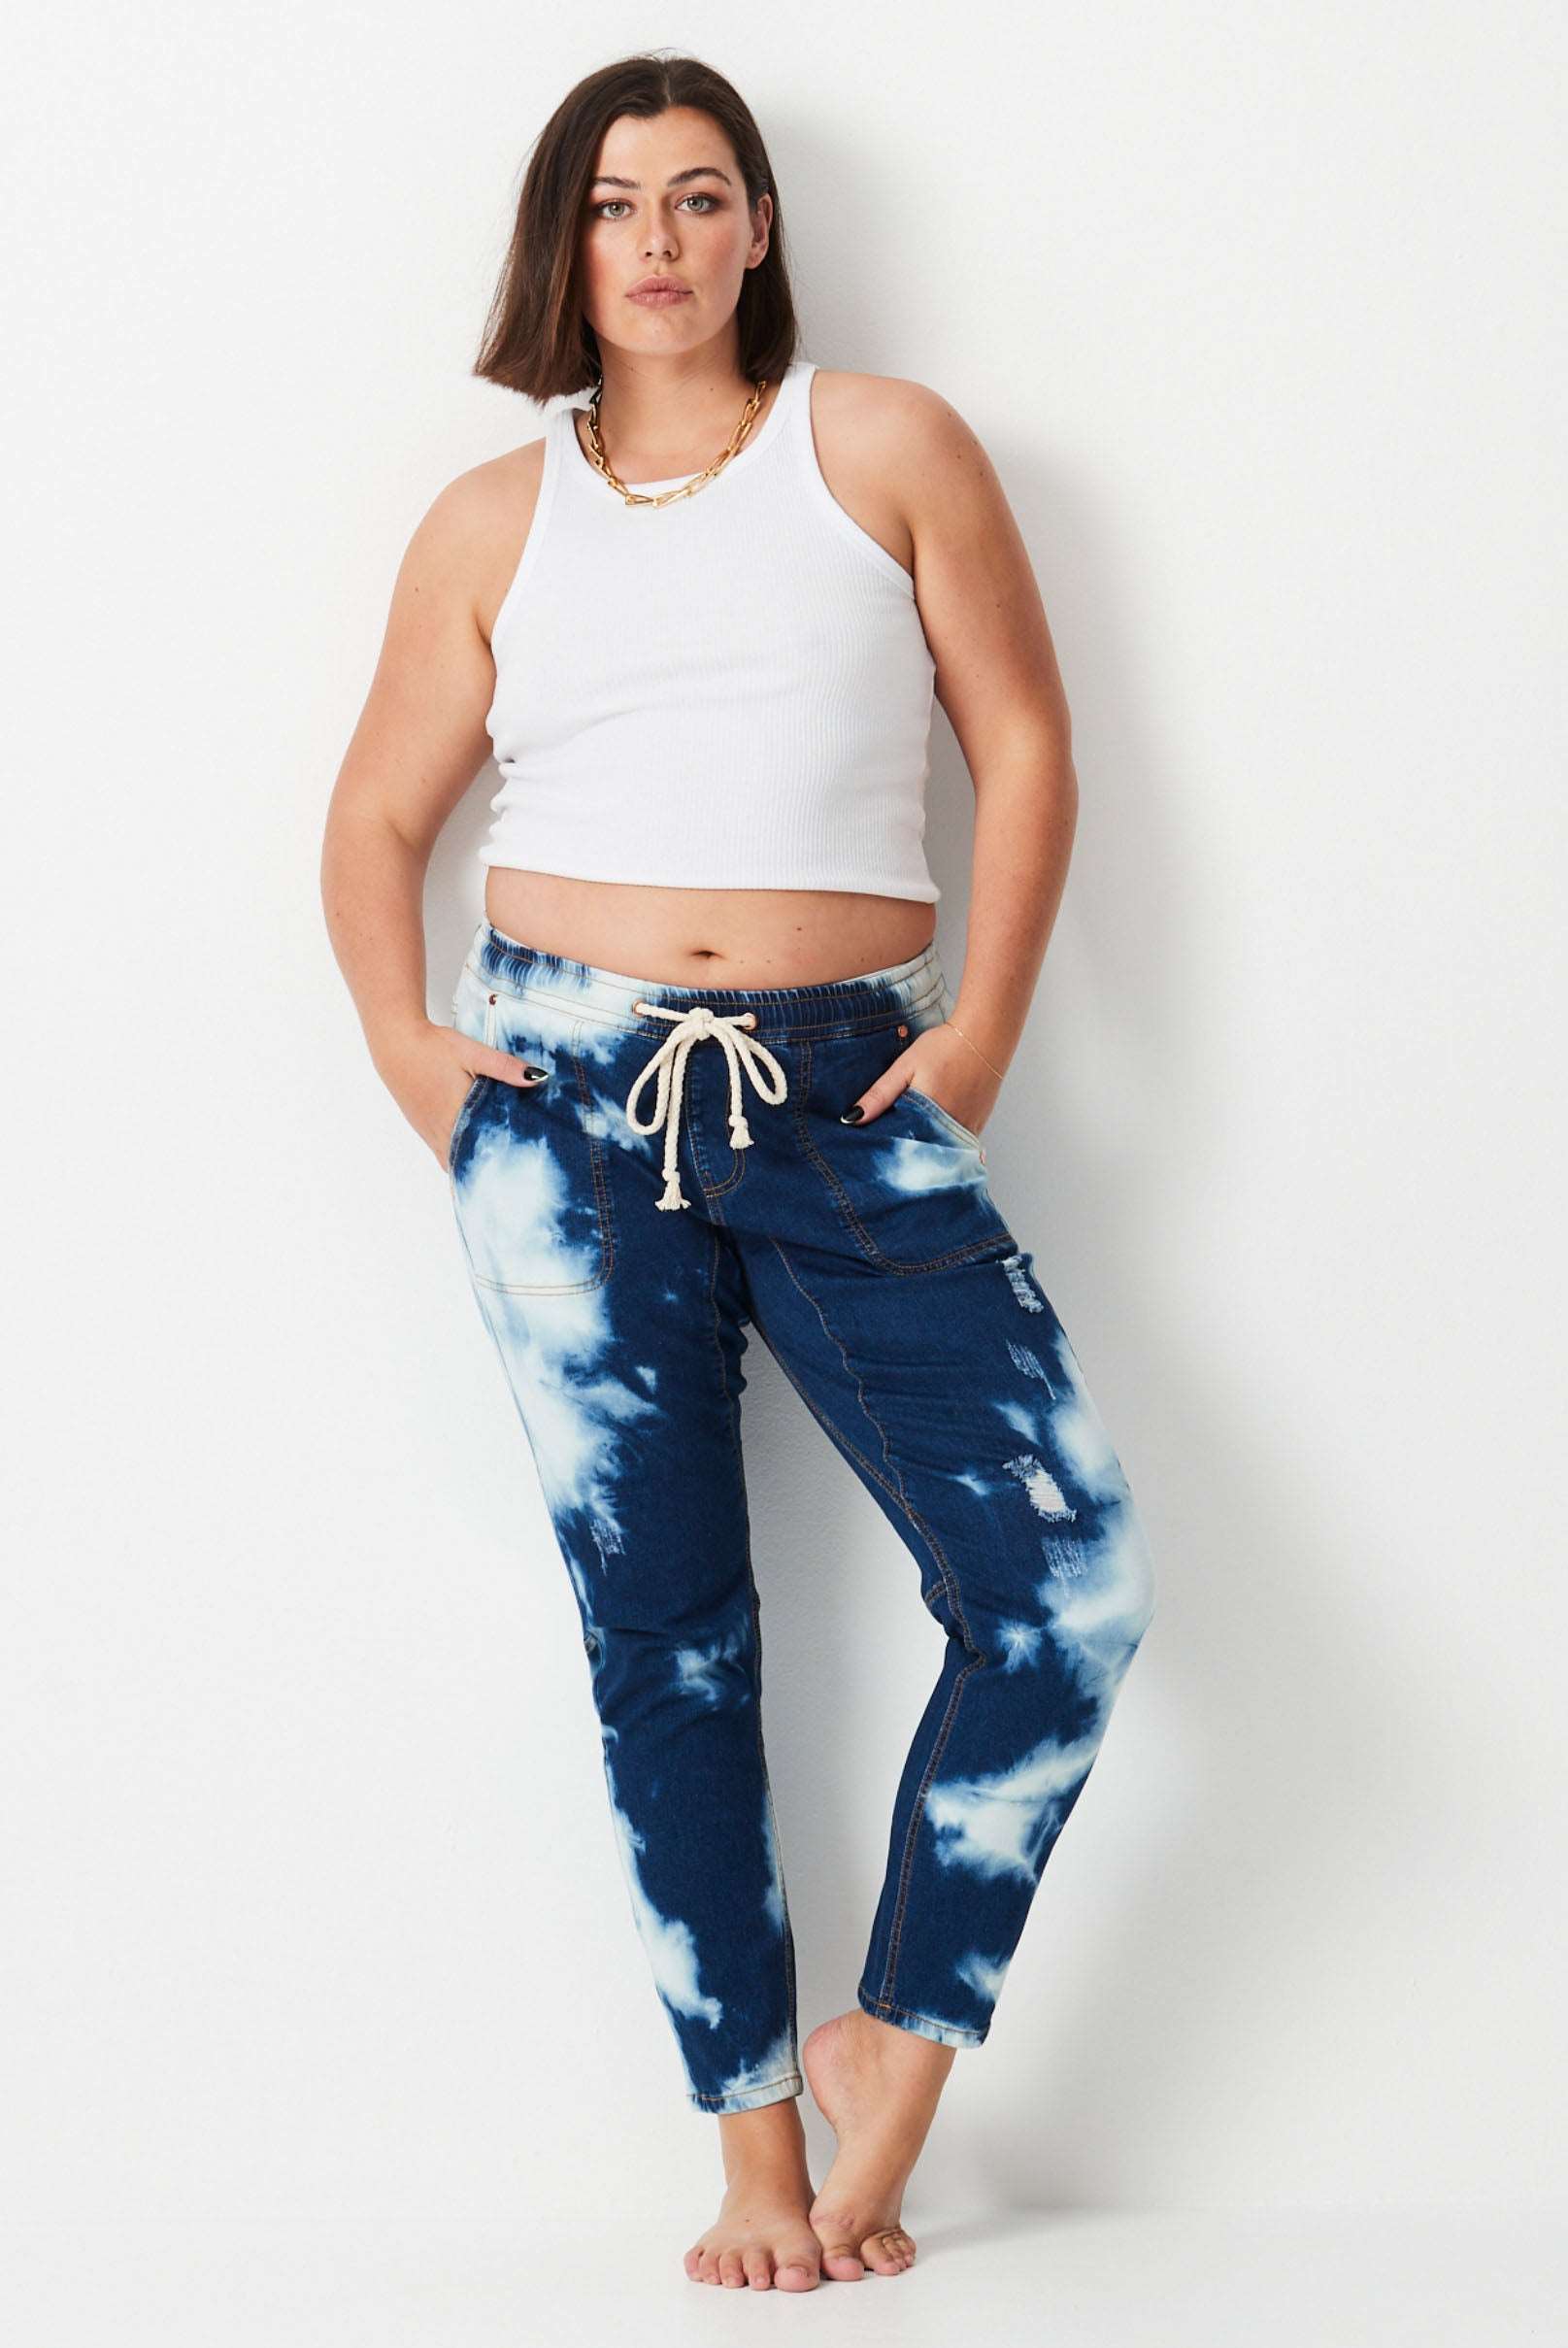 Model wears dark blue tie dyed stretch denim plus size jeans. with elastic waist and tapered leg.